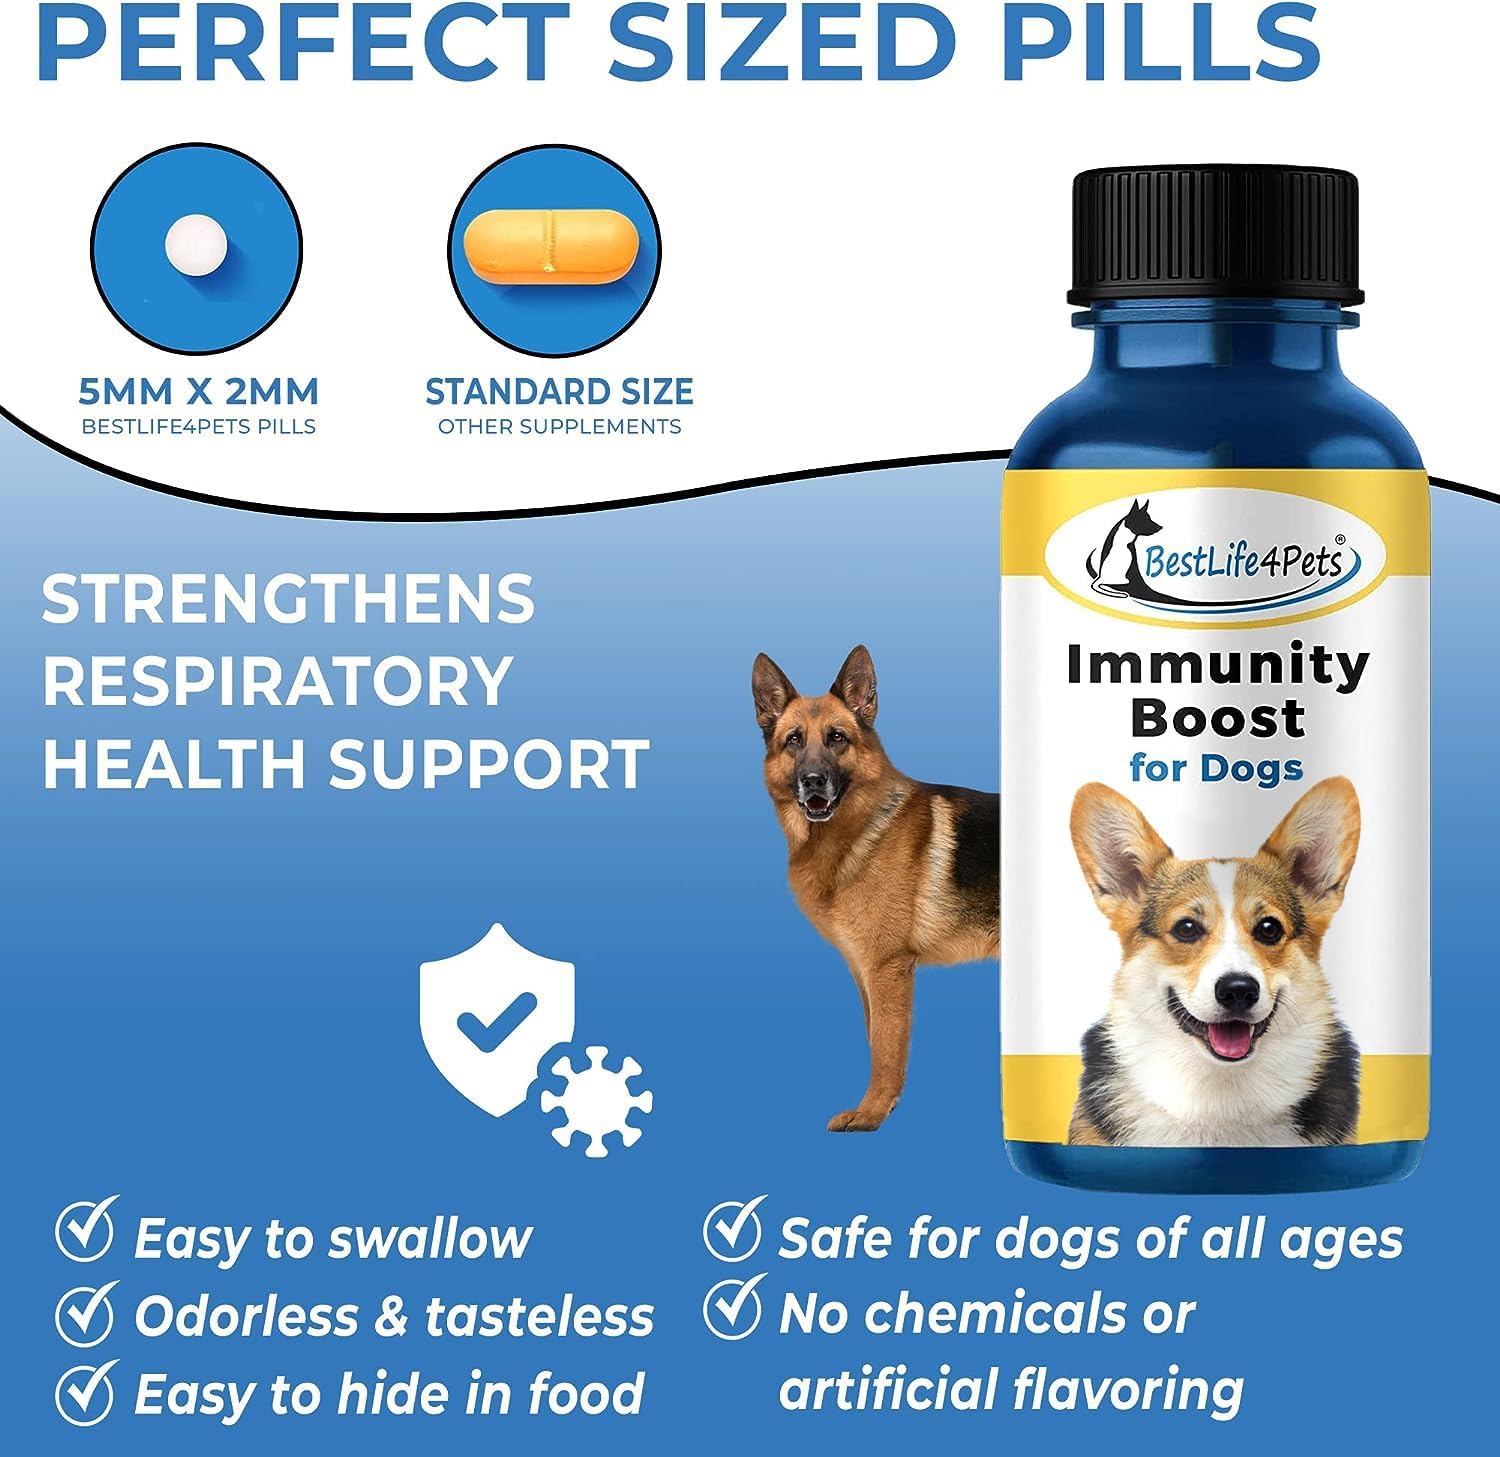 Immunity Boost for Dogs Supplement – Strengthens Respiratory Health Support - Natural Dog Vitamins and Supplements - All Natural, Easy to take Pills